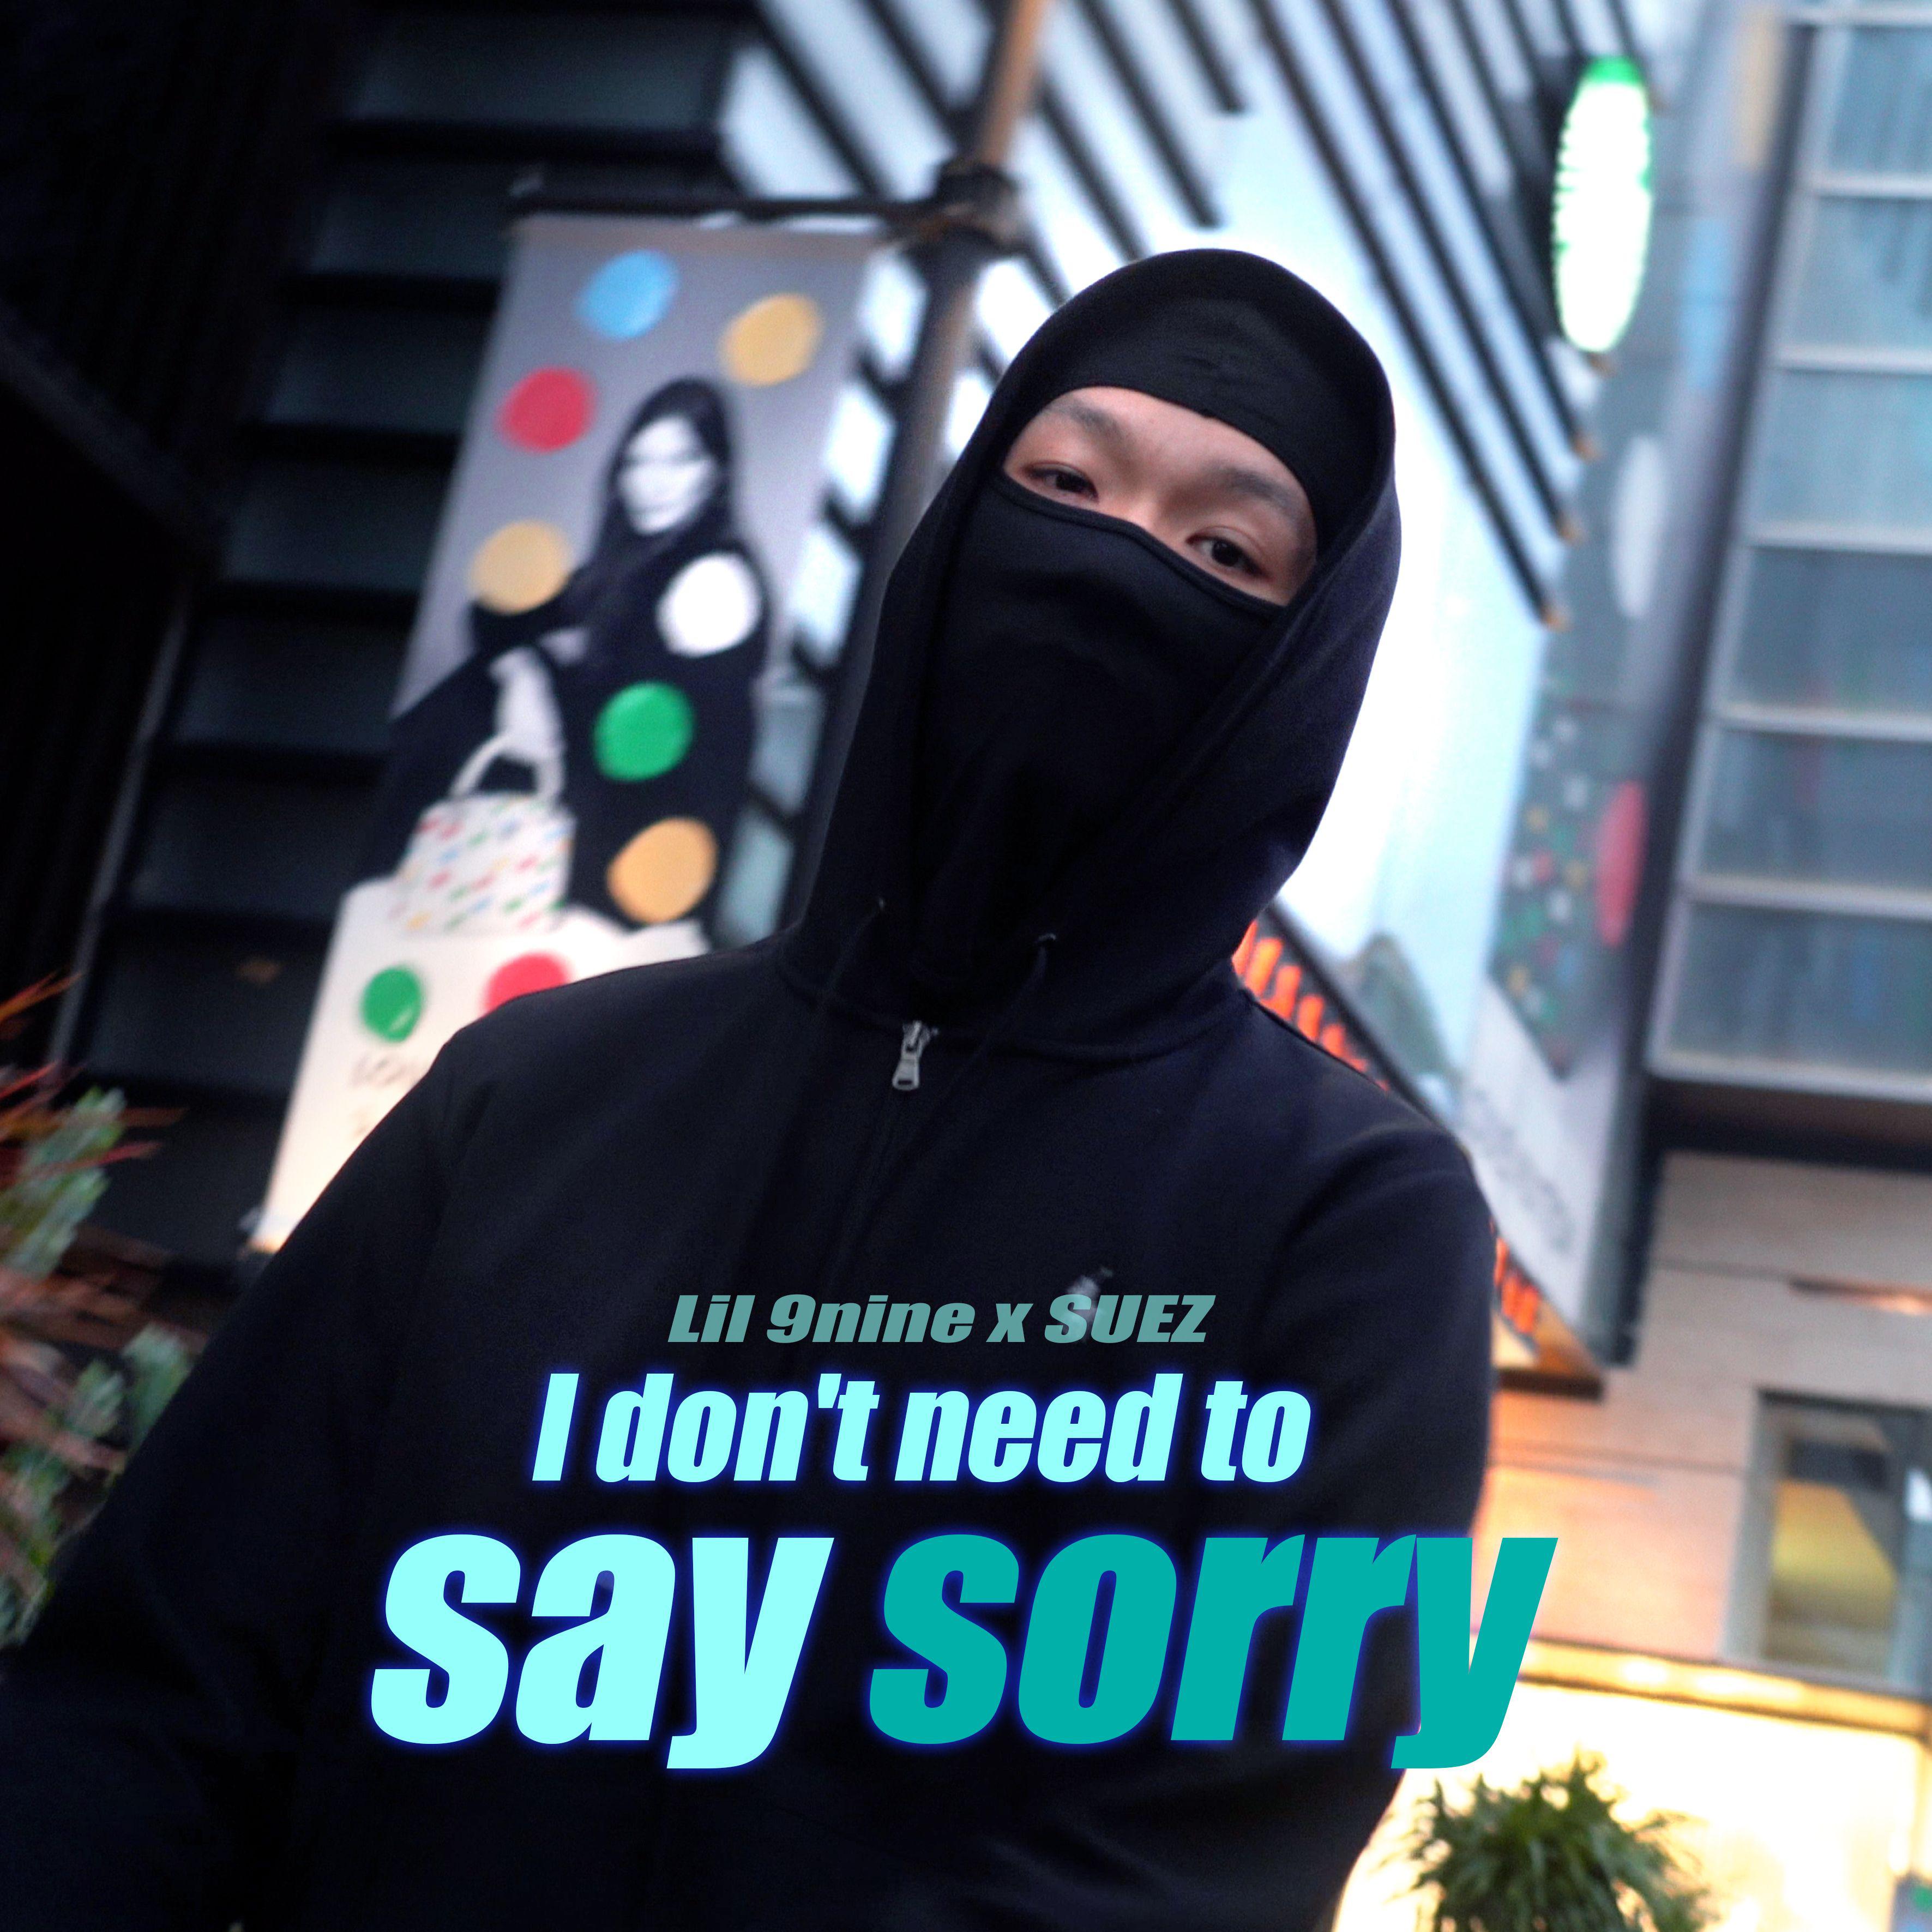 Lil 9ine - I don't need to say sorry